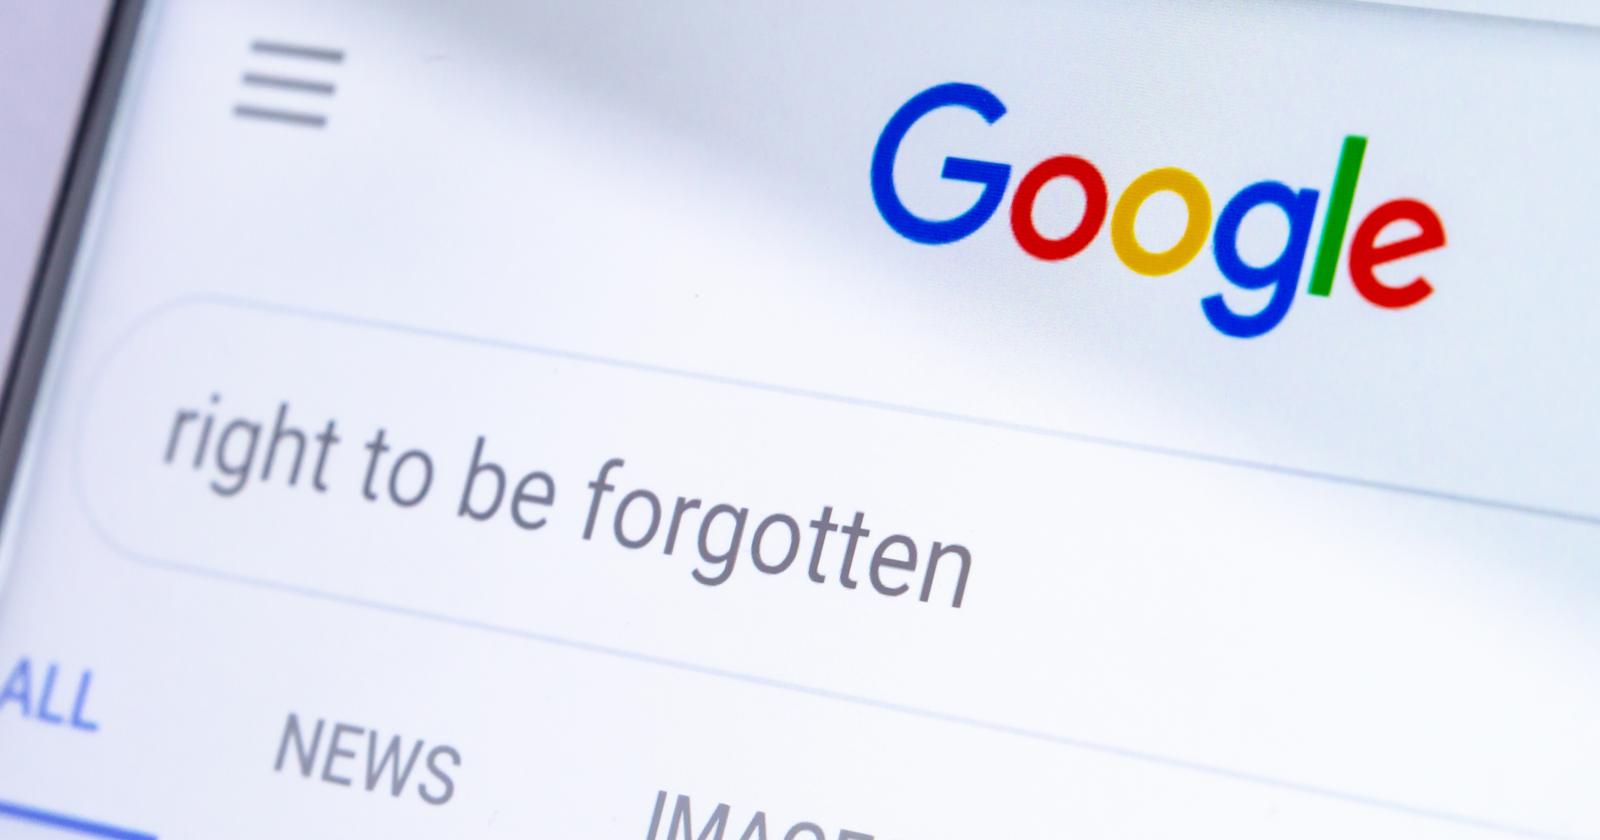 Google And The Right To Be Forgotten via @sejournal, @brockcooper1